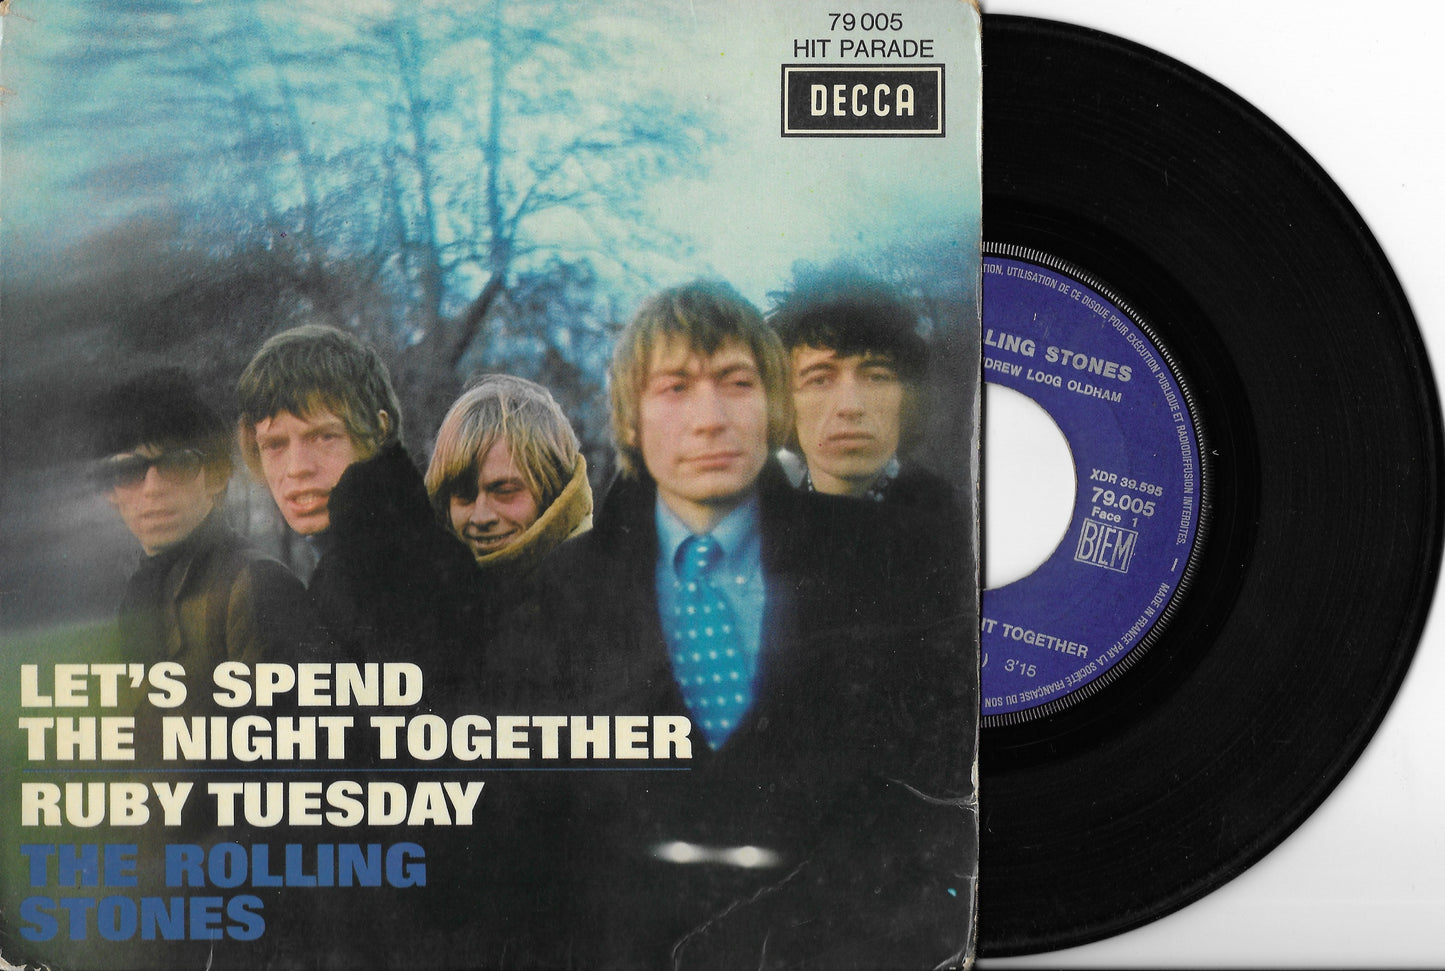 THE ROLLING STONES - Let's Spend The Night Together